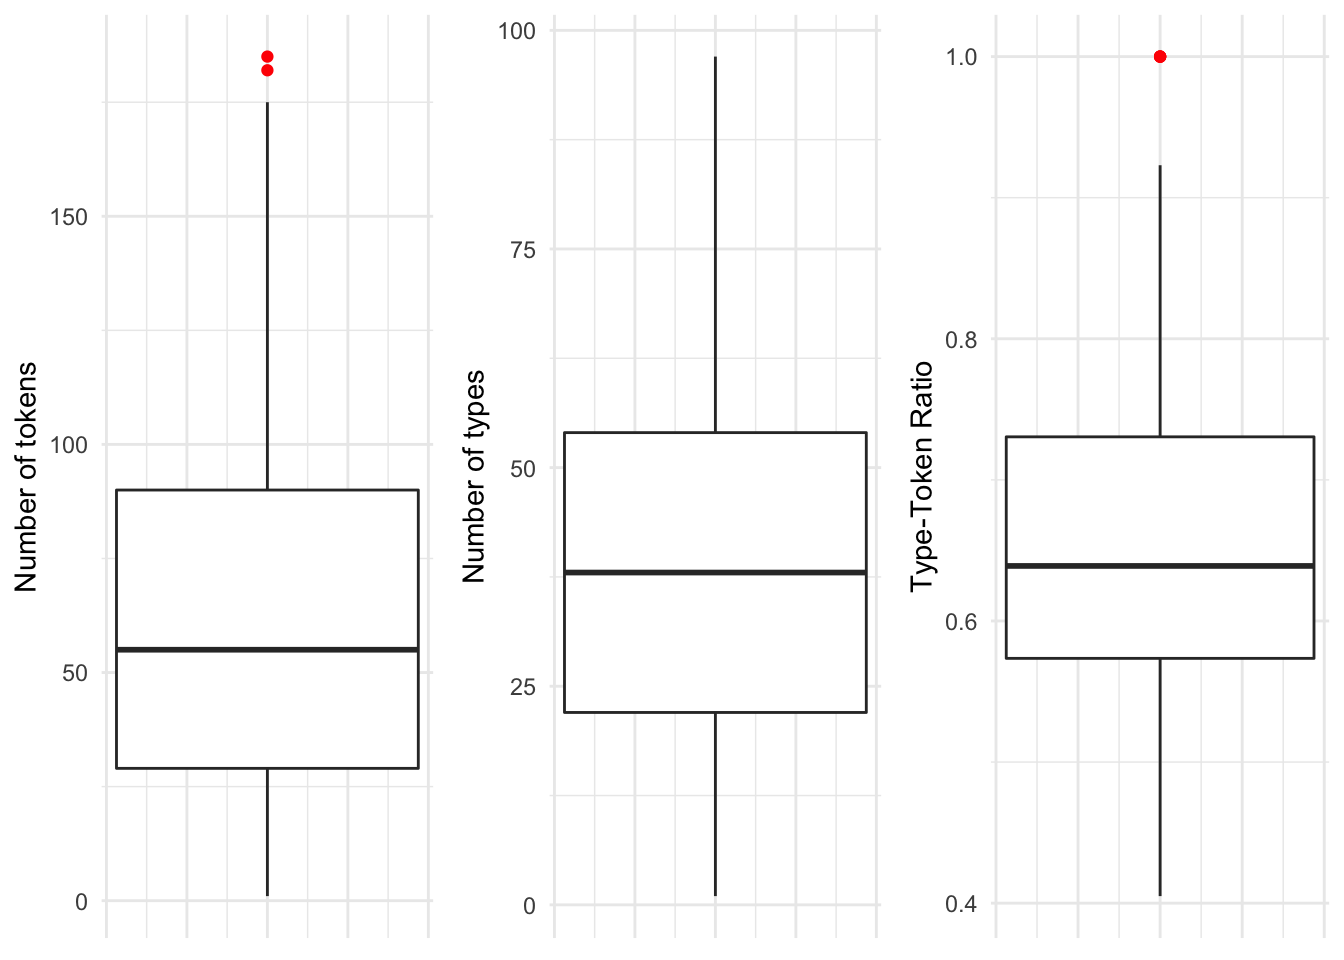 Boxplots for each of the continuous variables in the BELC dataset.